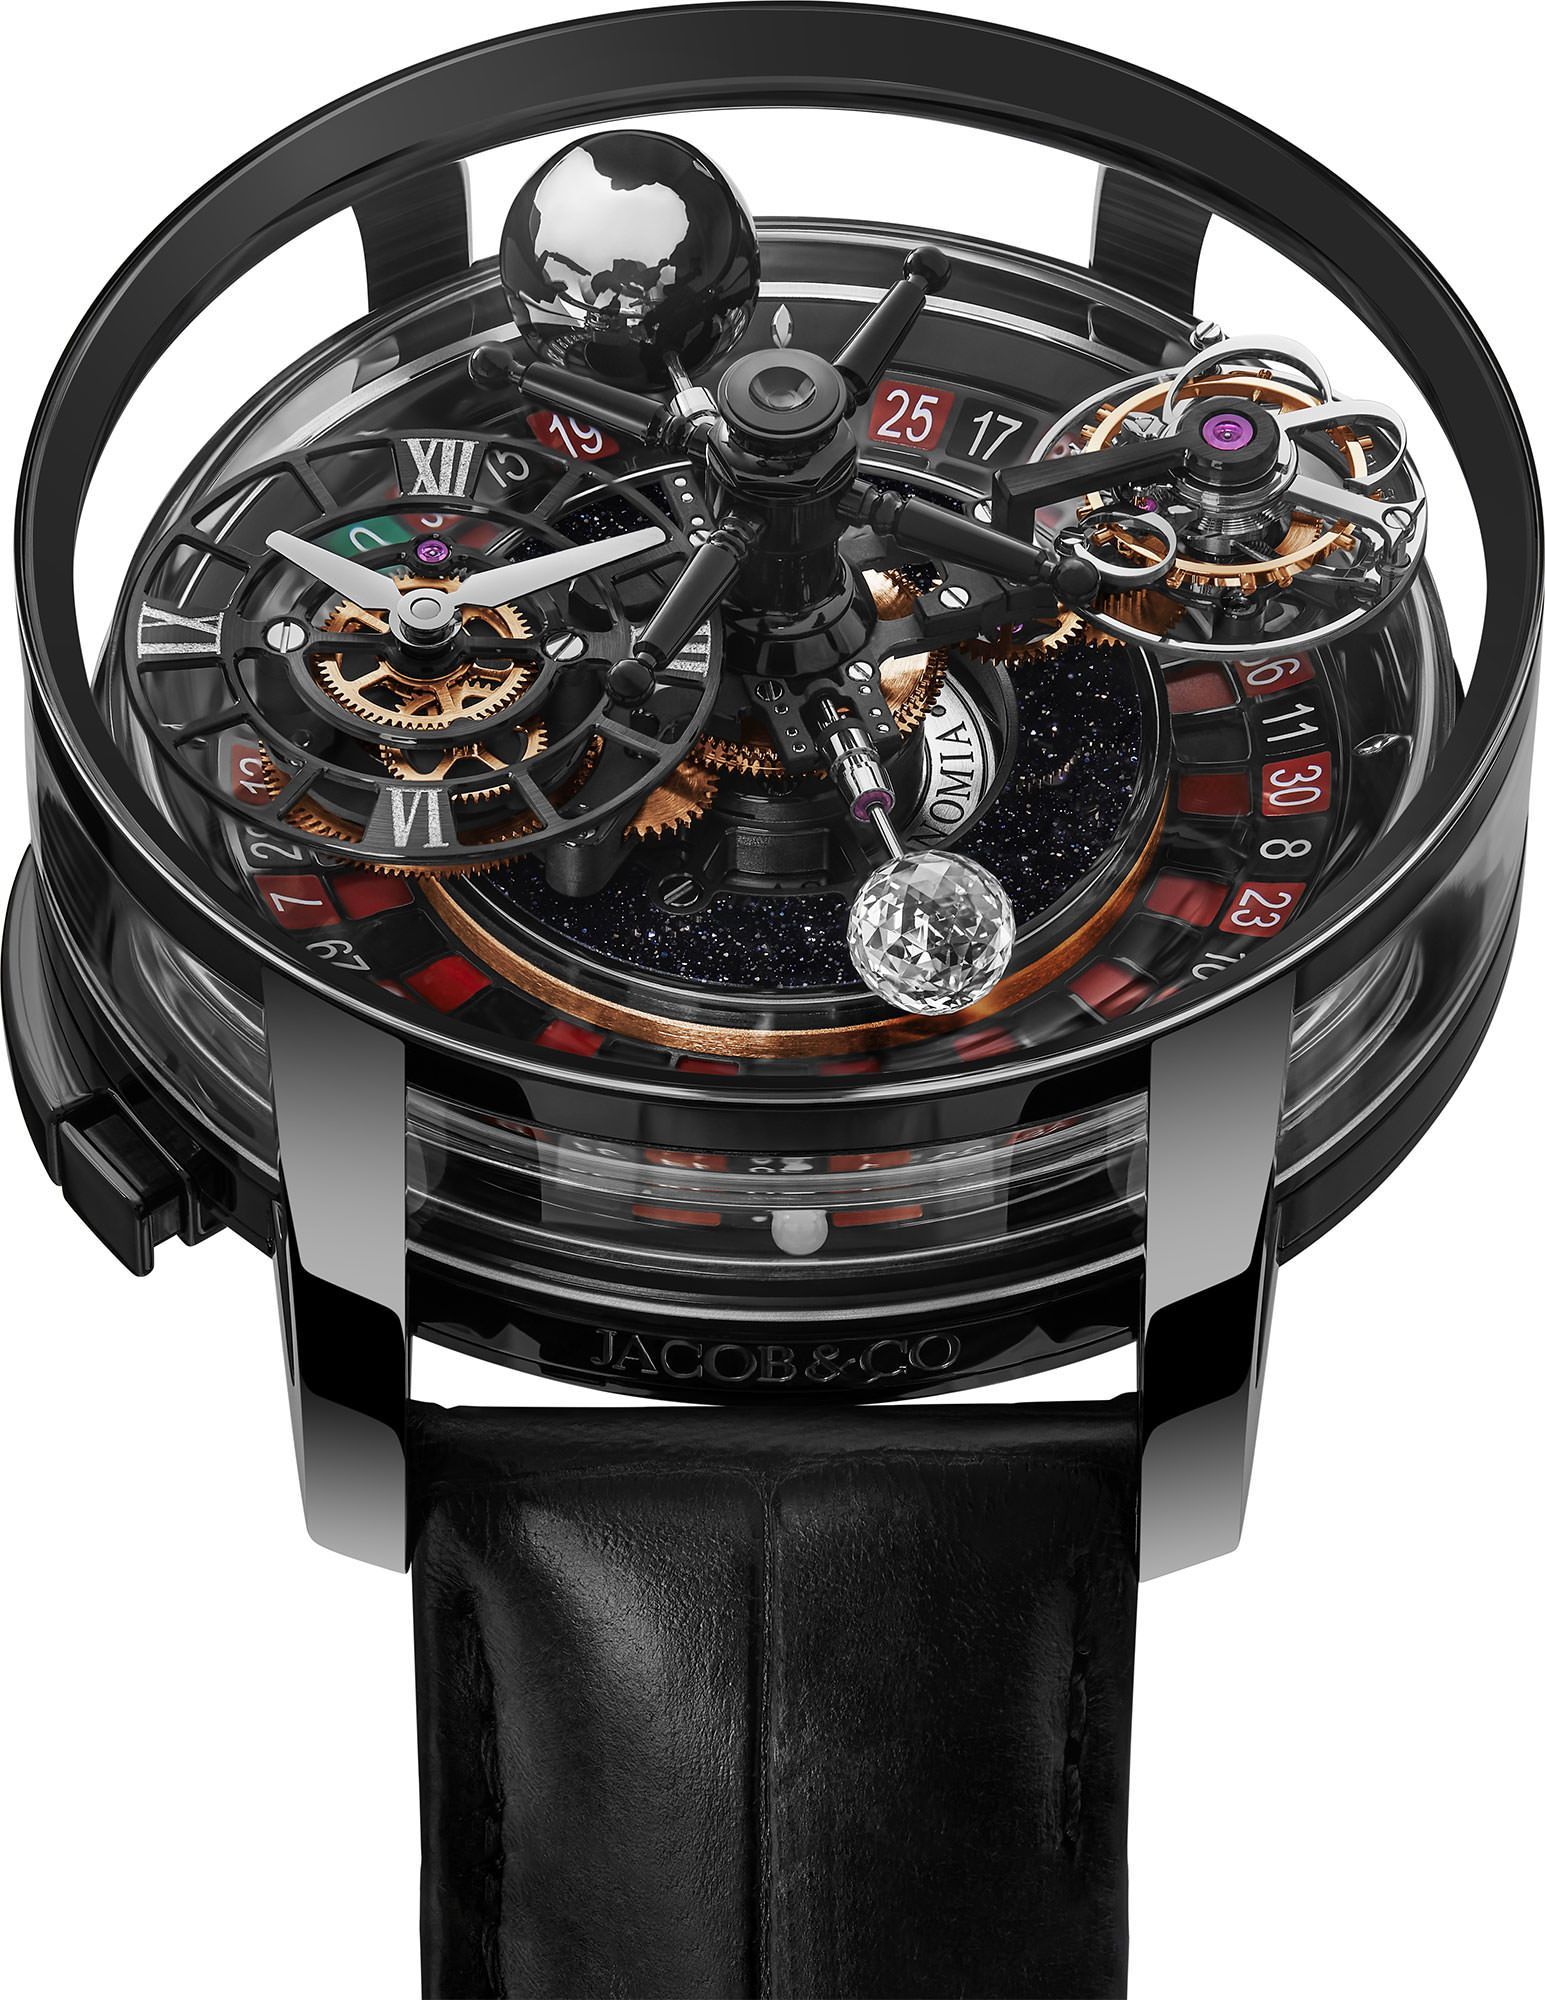 Jacob & Co. Astronomia Casino 47 mm Watch in Black Dial For Men - 1